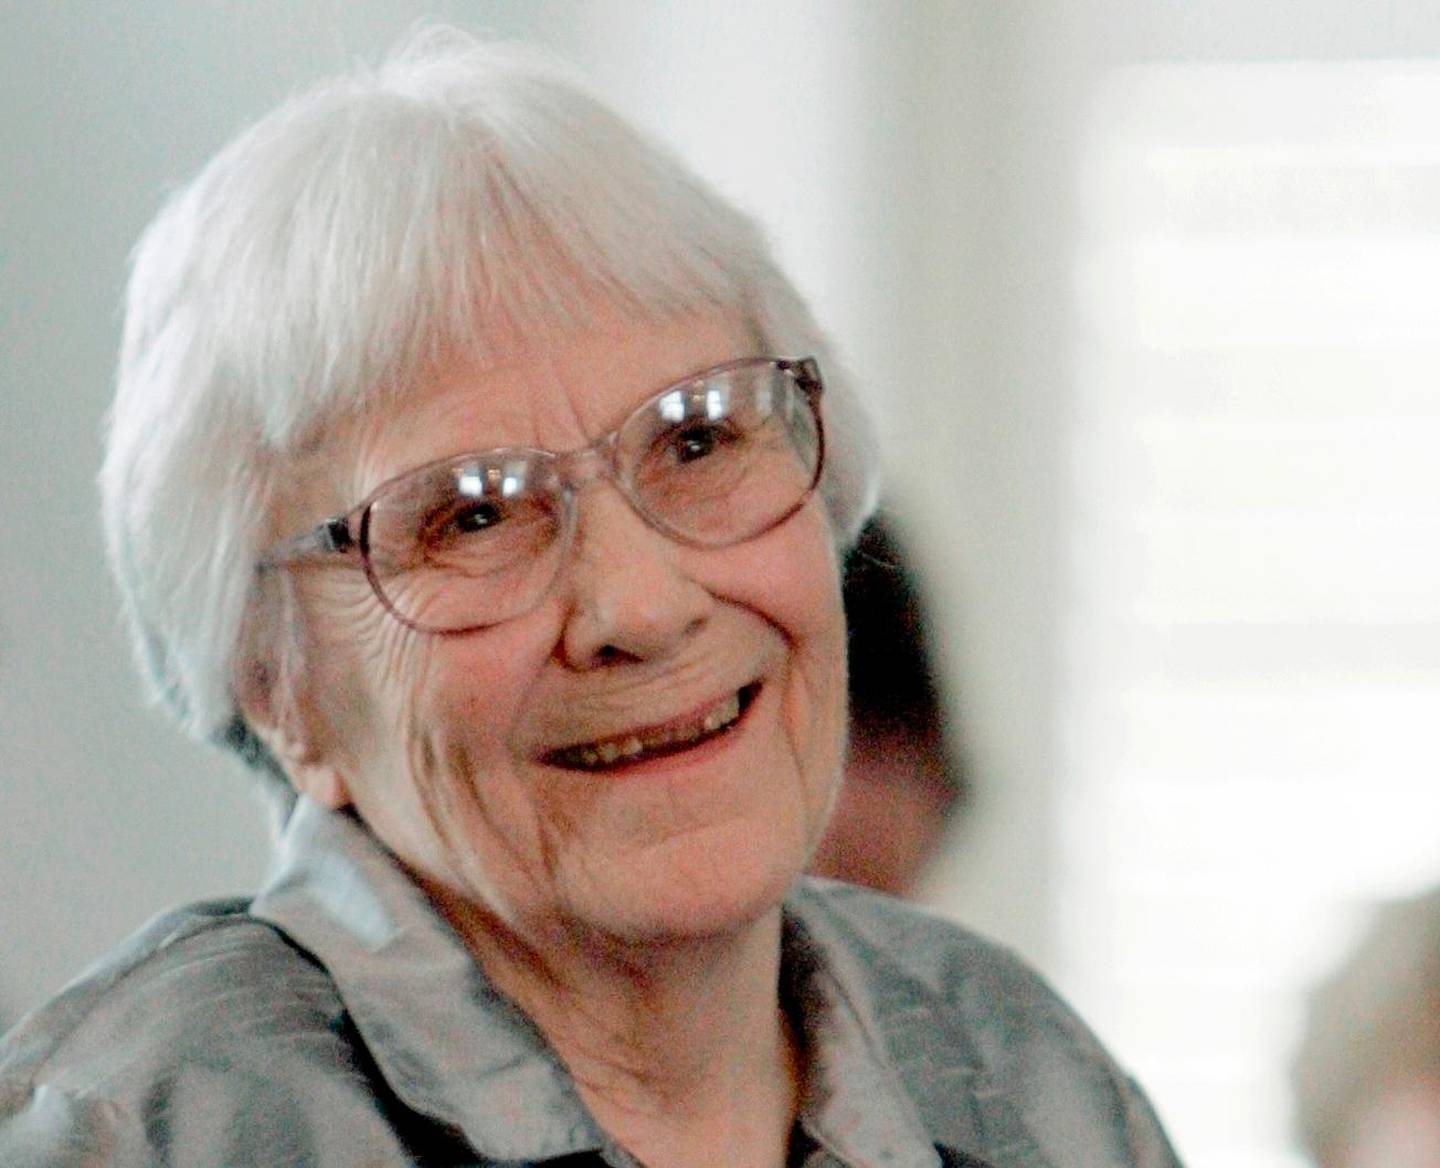 FILE - In this Aug. 20, 2007, file photo, author Harper Lee smiles during a ceremony honoring the four new members of the Alabama Academy of Honor at the Capitol in Montgomery, Ala. Six letters donated to Emory University and being made public Monday, April 2, 2018, show the author lamenting the conservative values of her native Monroeville, Alabama, and longing to back in New York. They also reflect her deep compassion for her father, A.C. Lee, the basis for the famous fictional lawyer Atticus Finch. (AP Photo/Rob Carr, File)